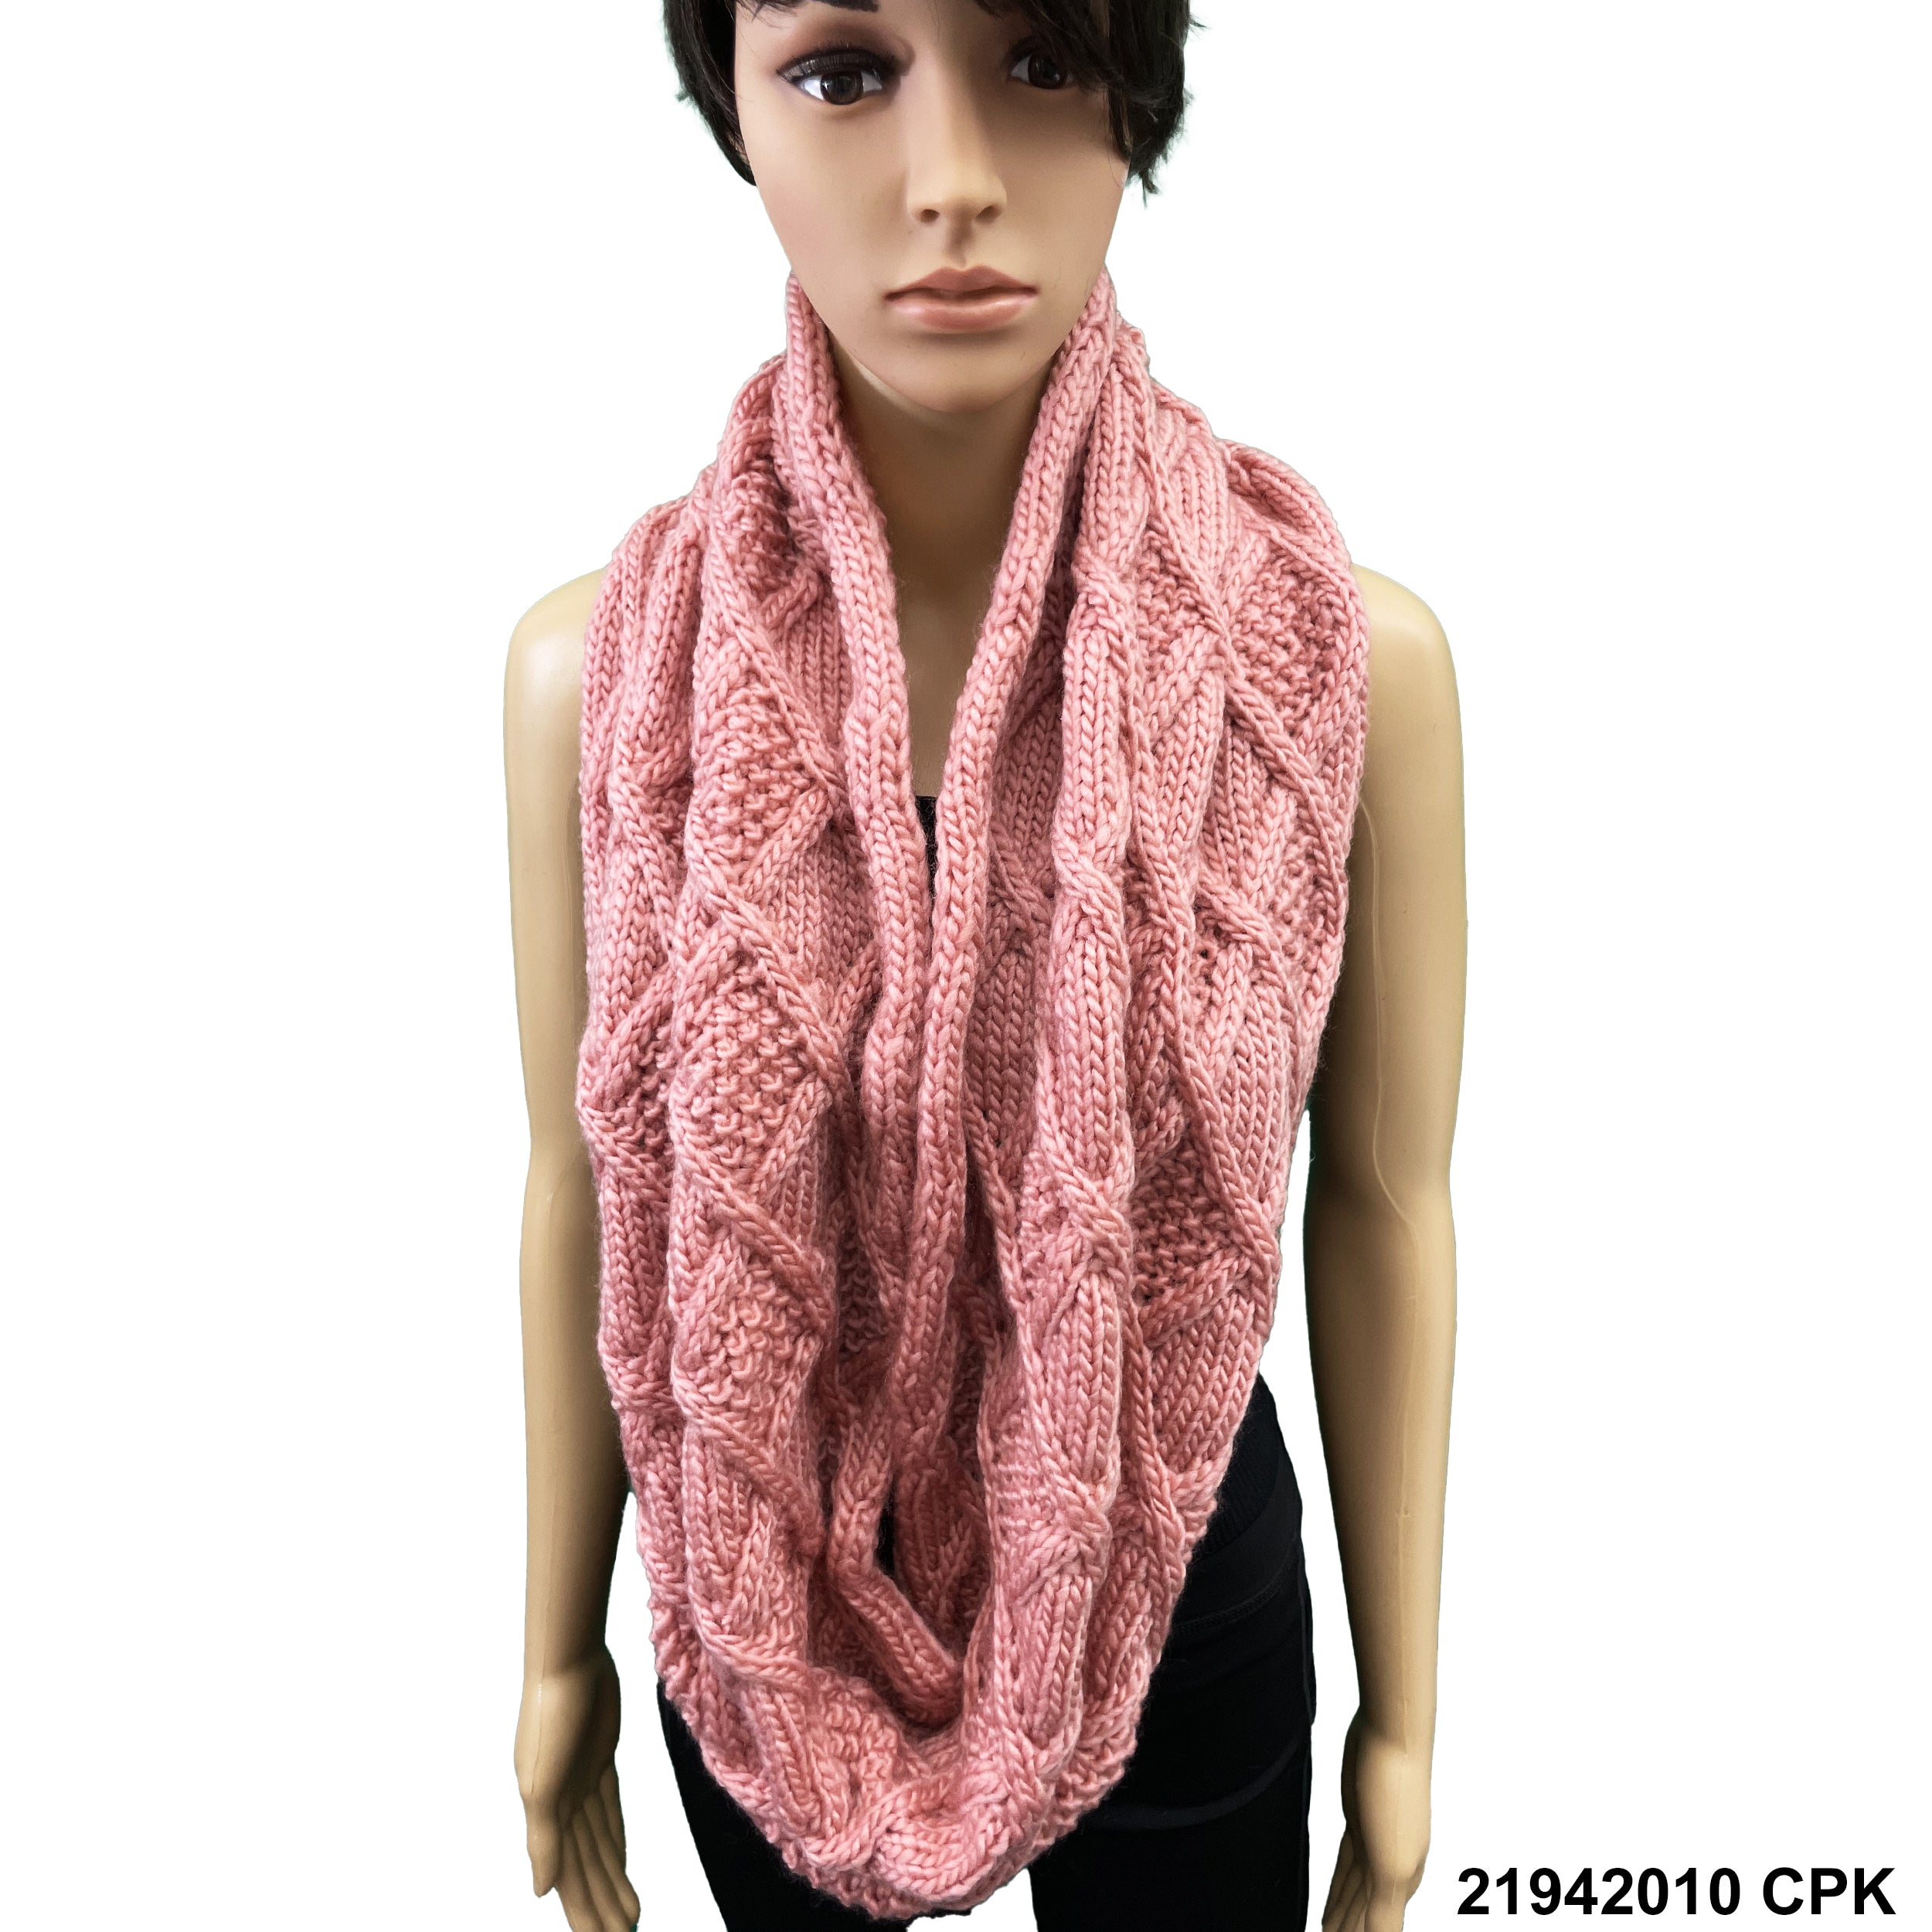 Knitted Wool Infinity Leaf Scarf 21942010 CPK